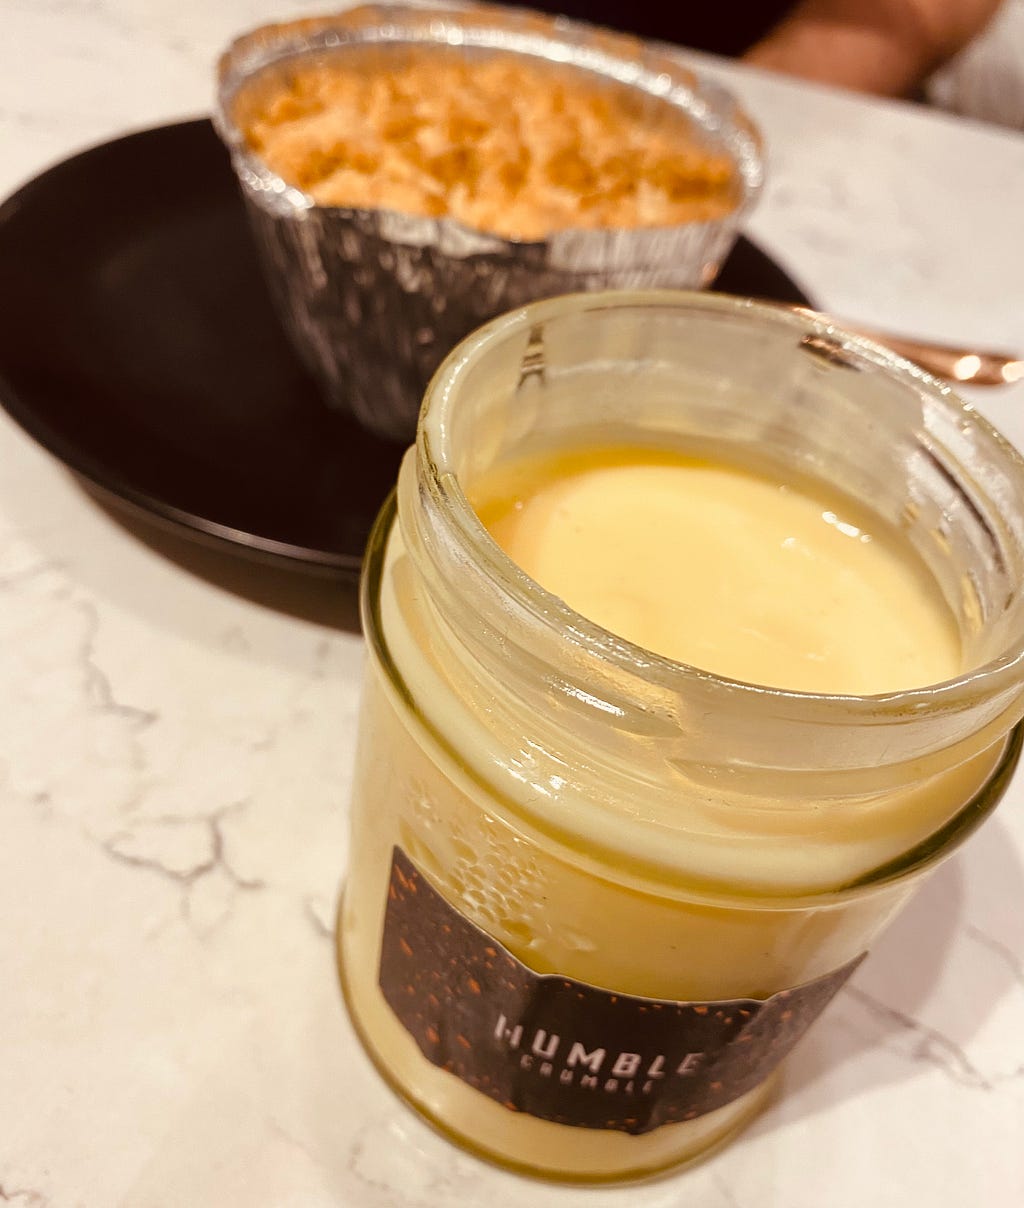 A glass jar that contains custard on it on the front and faintly visible on the back a crumble served on a tin foil plate.